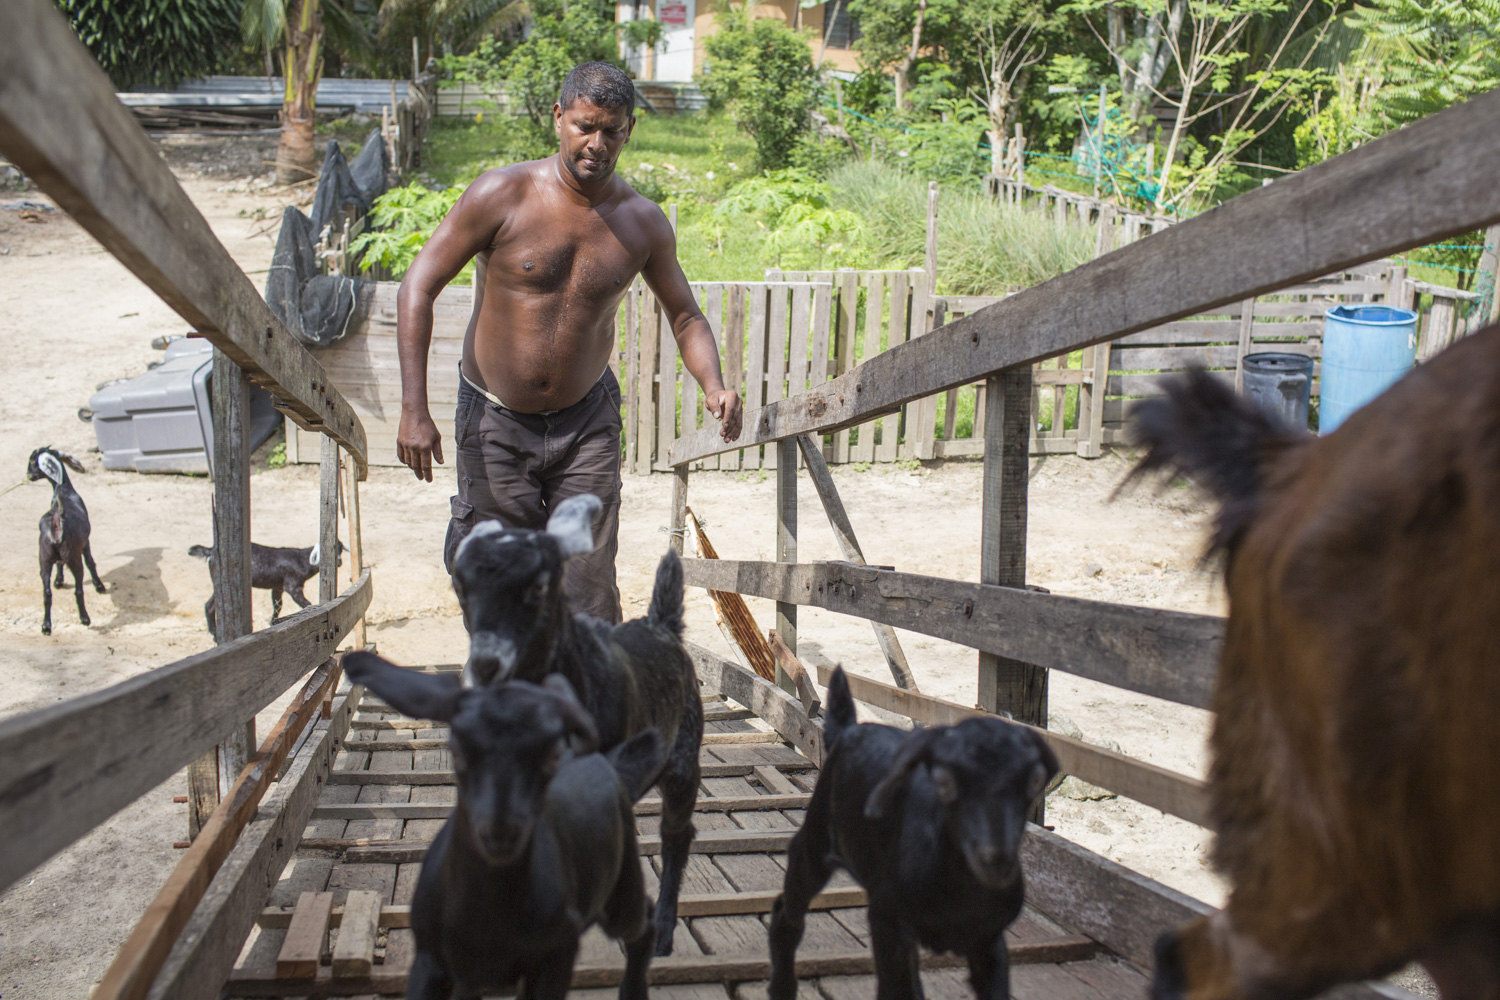 After his stint at Positive Living, Selva hopes to set up his own farm in the long run. He developed a keen passion for rearing goats after caring for the ones at PLC.